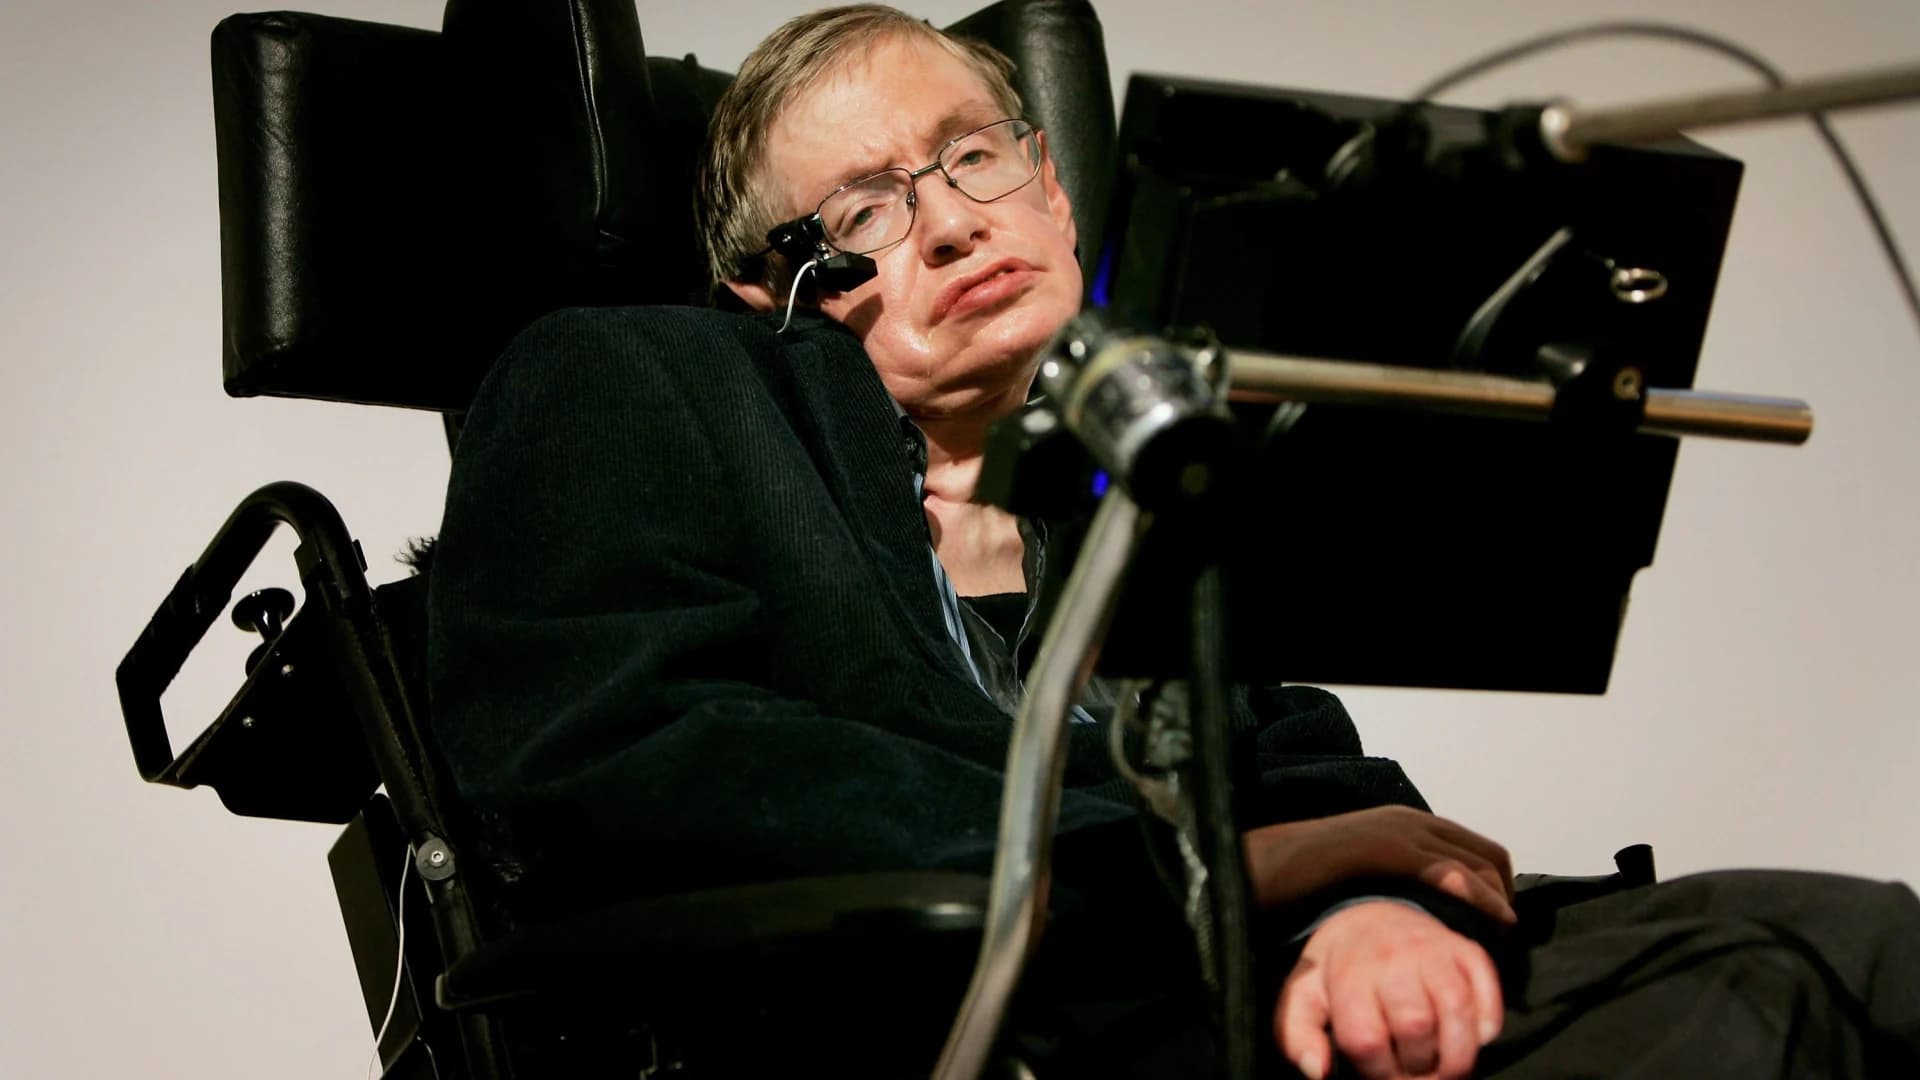 In posthumous message, Stephen Hawking says science under threat